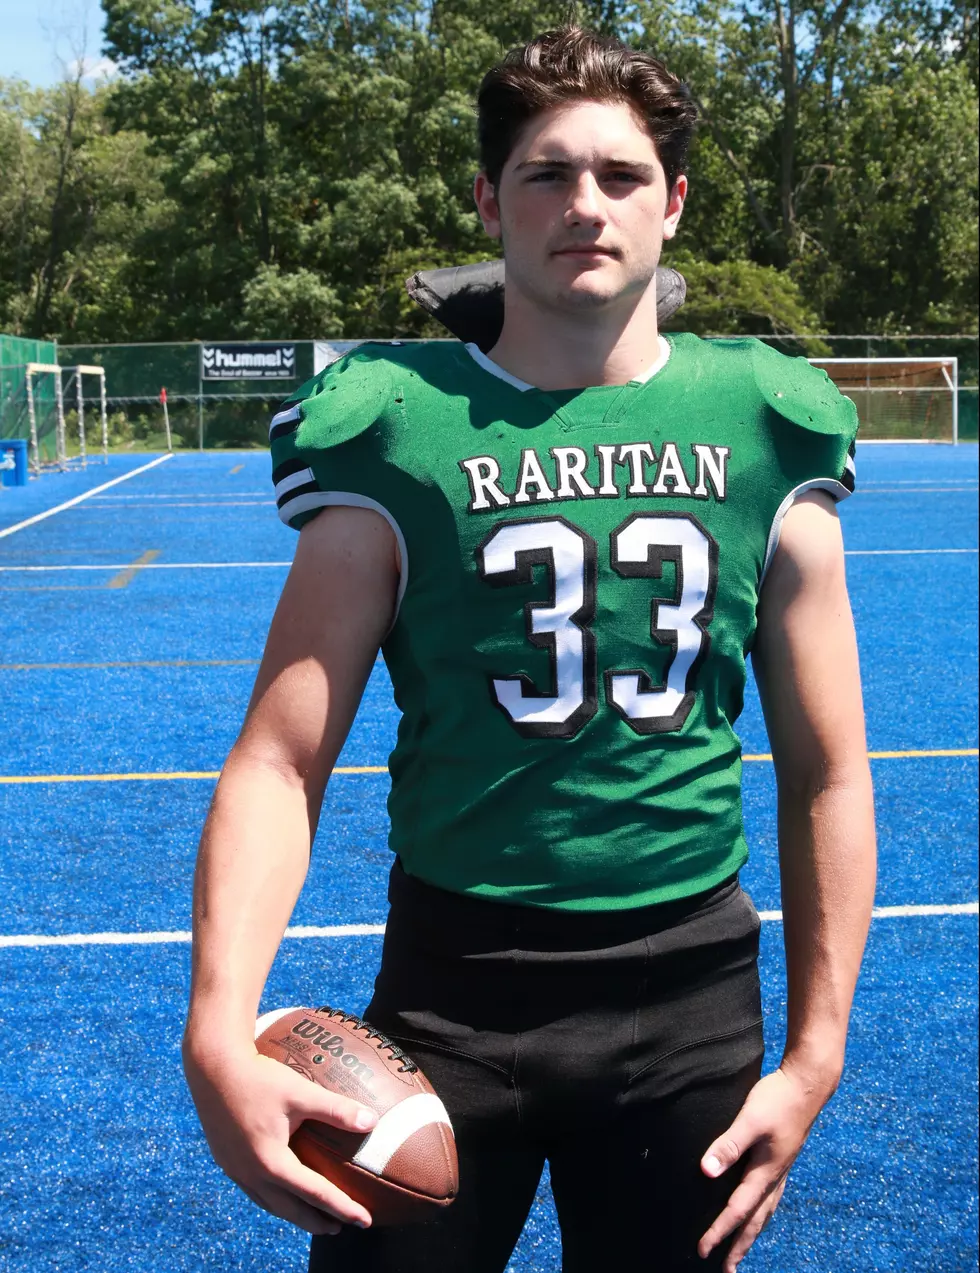 U-Conned: Raritan’s Ryan Dickens Has Scholarship Offer Pulled By UConn Just 17 Days Before Signing Day